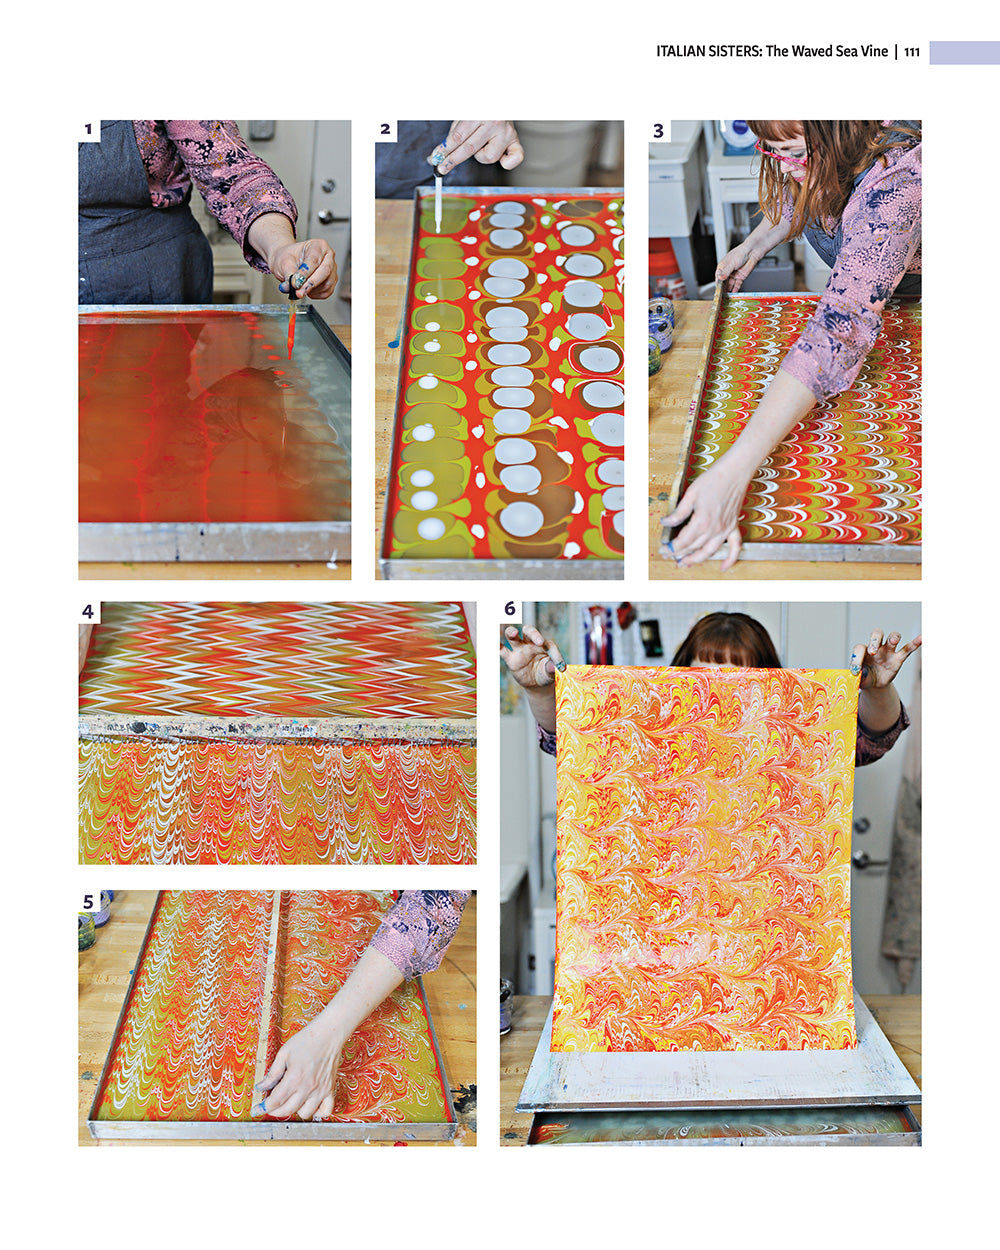 Making Marbled Paper